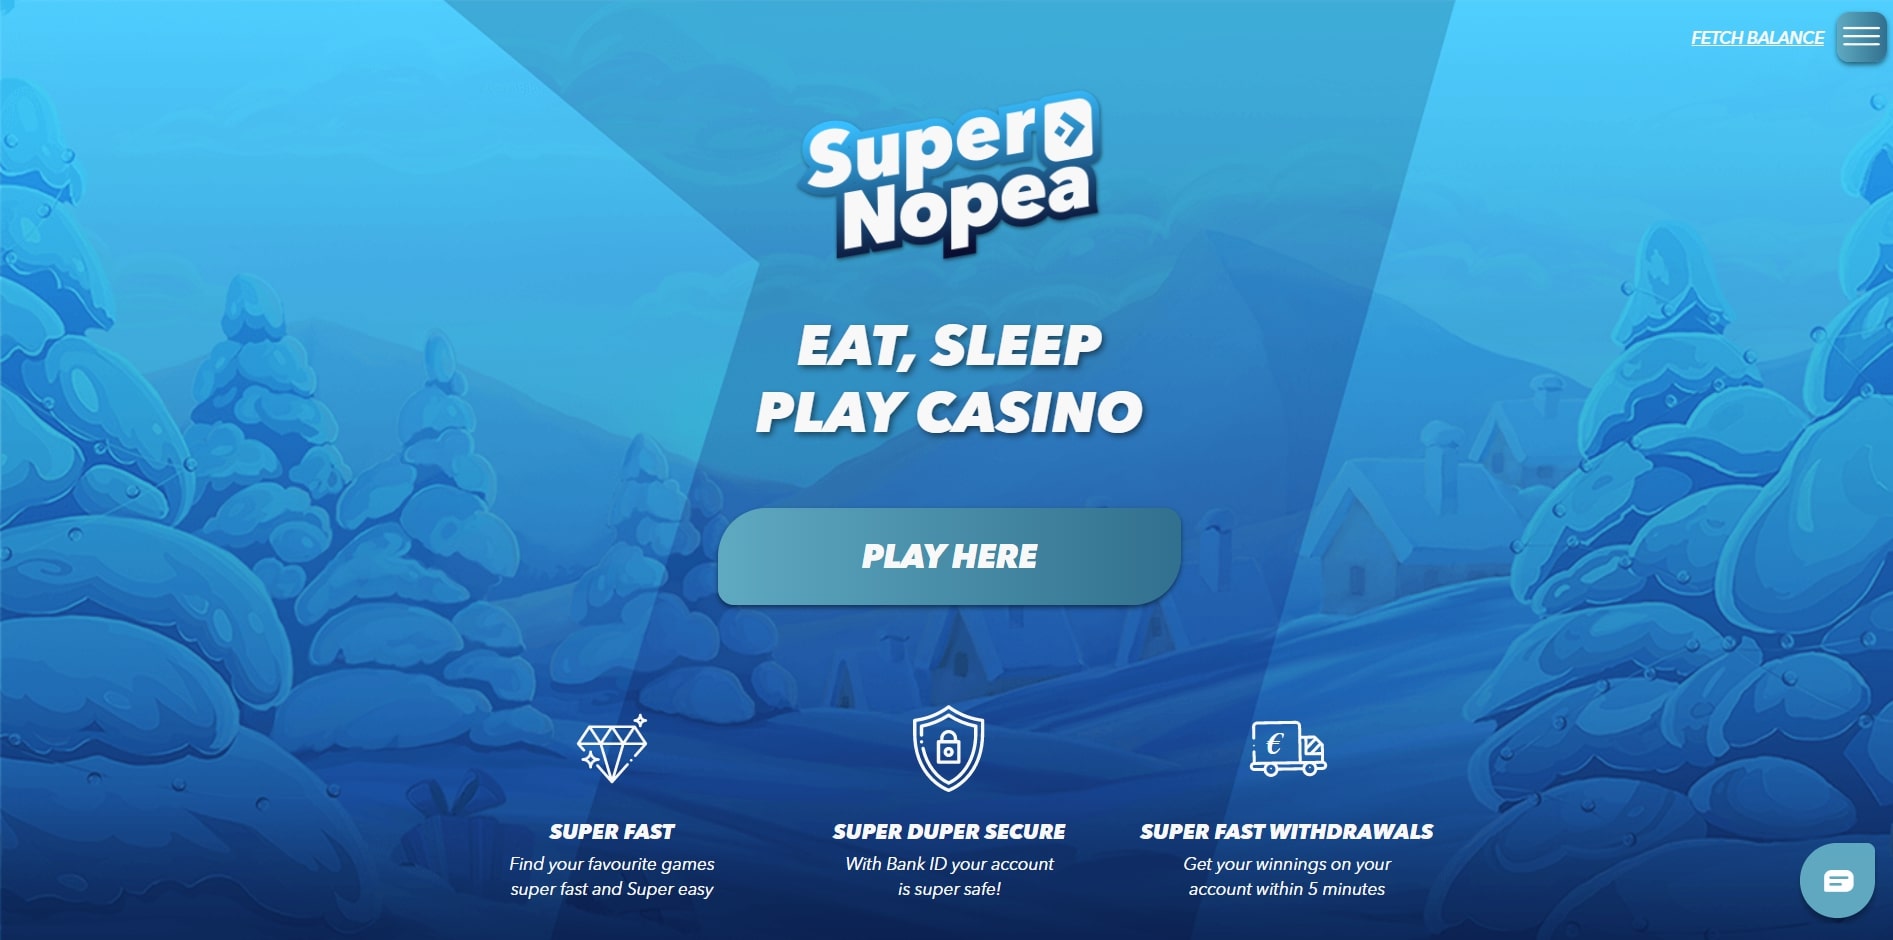 SuperNopea Casino Review